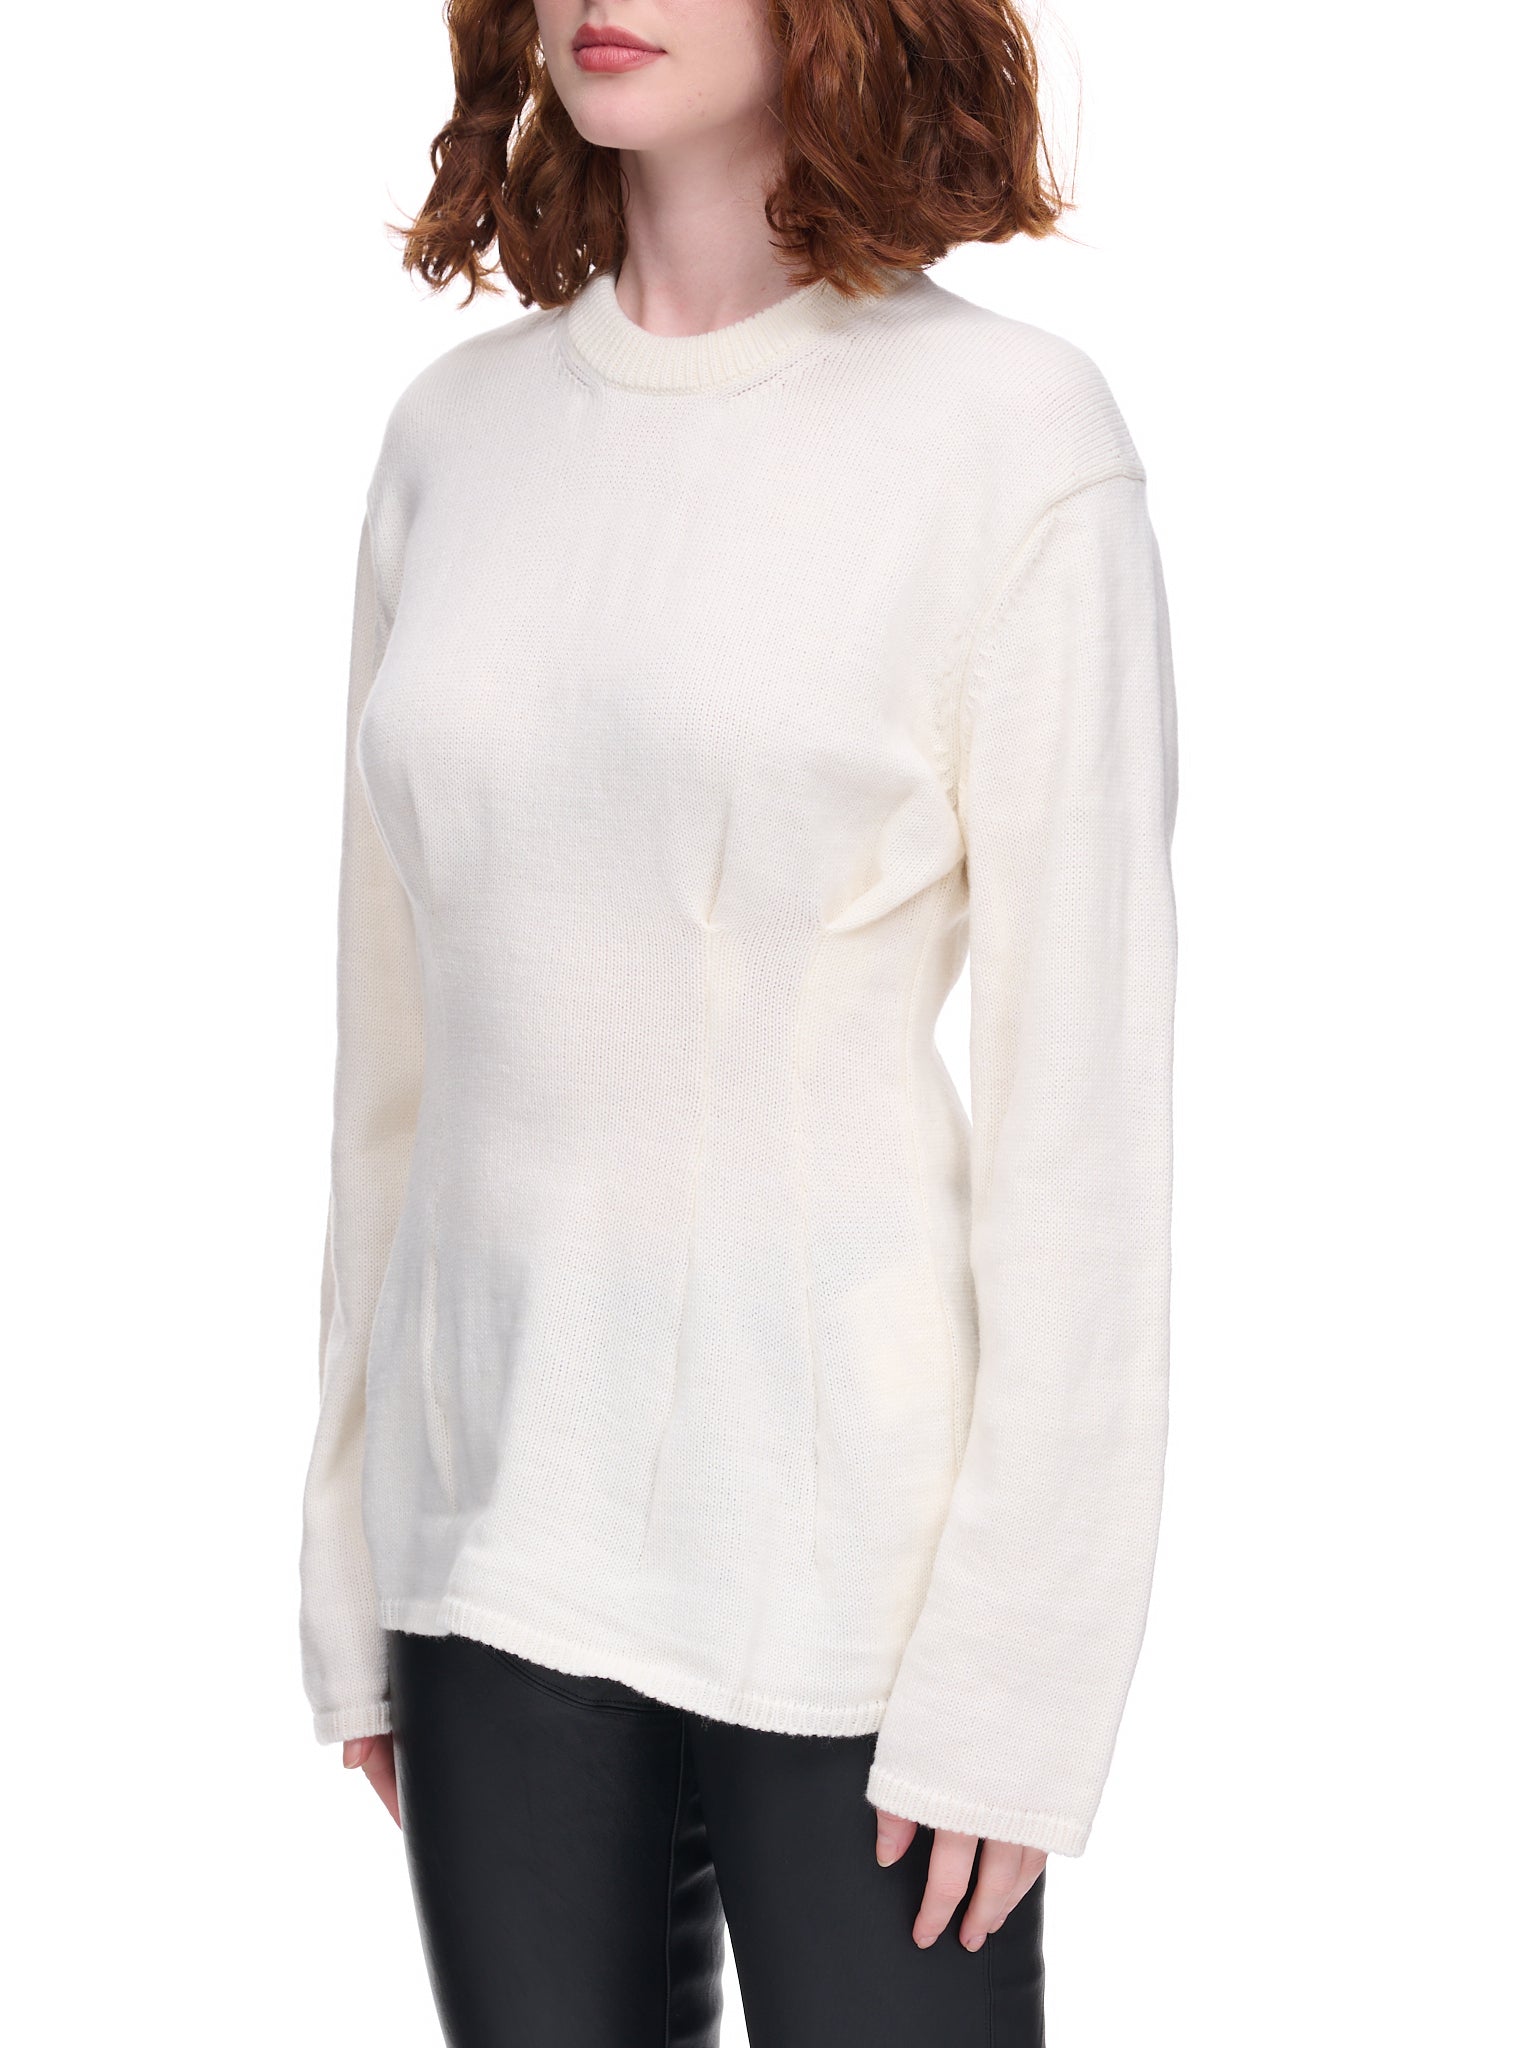 Shaped Knit Sweater (GJ-N501-051-OFFWHITE)